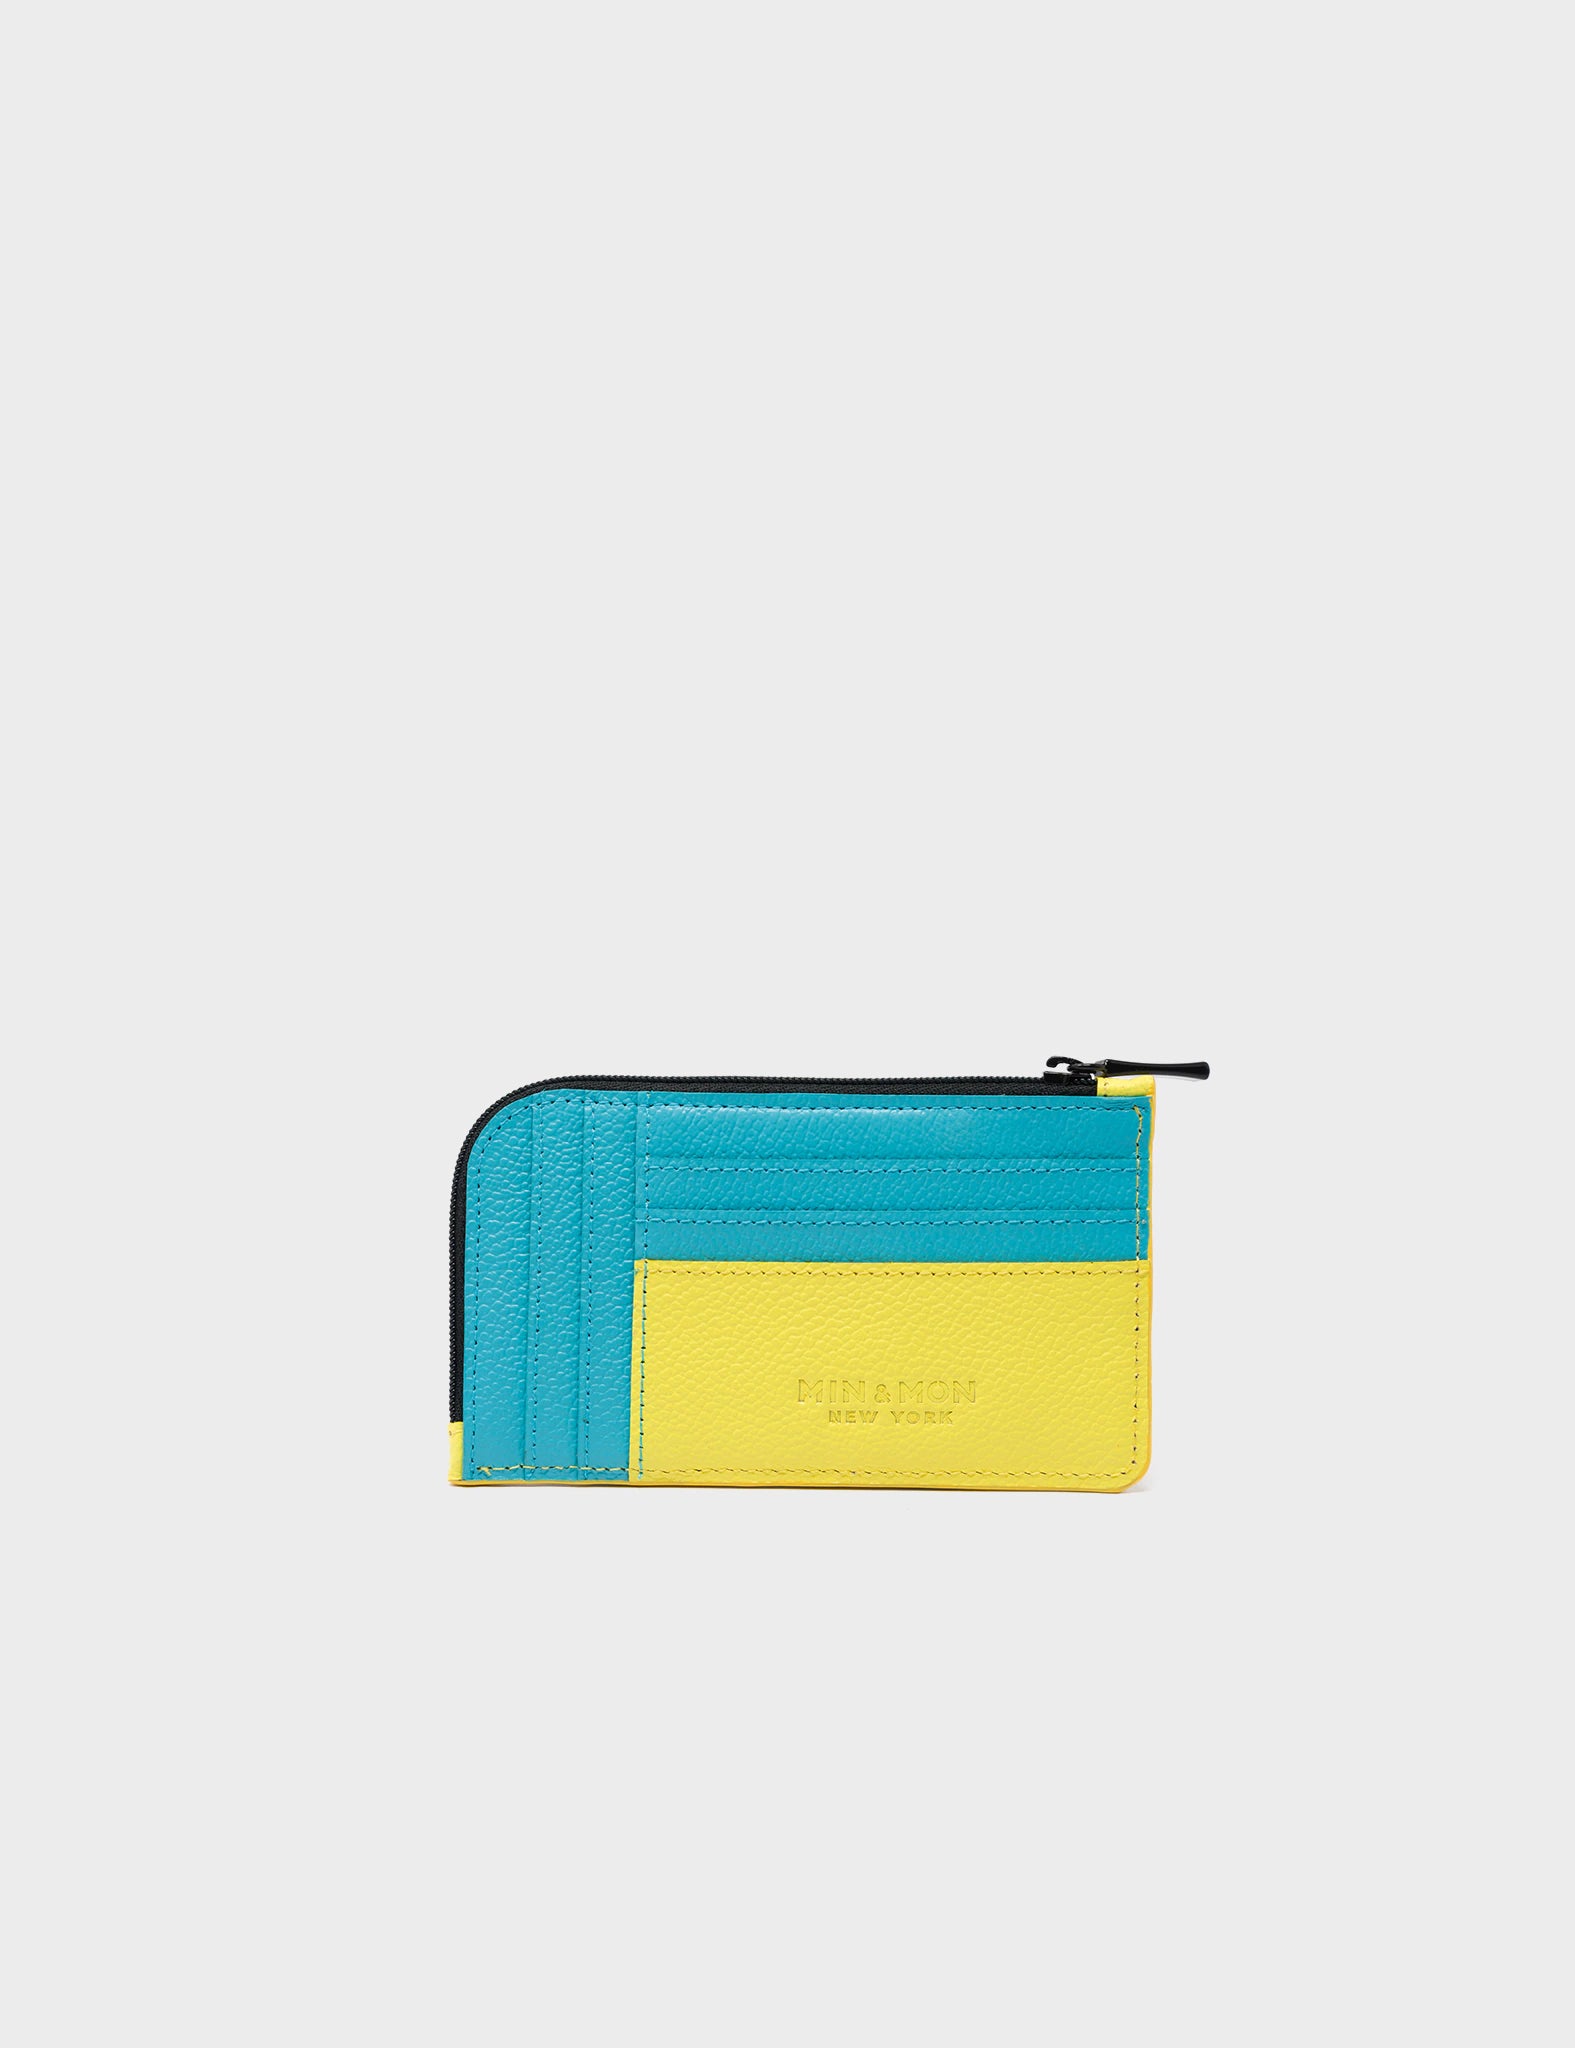 Fausto Yellow Leather Zip-around Cardholder - Urban Doodles Print - Back View